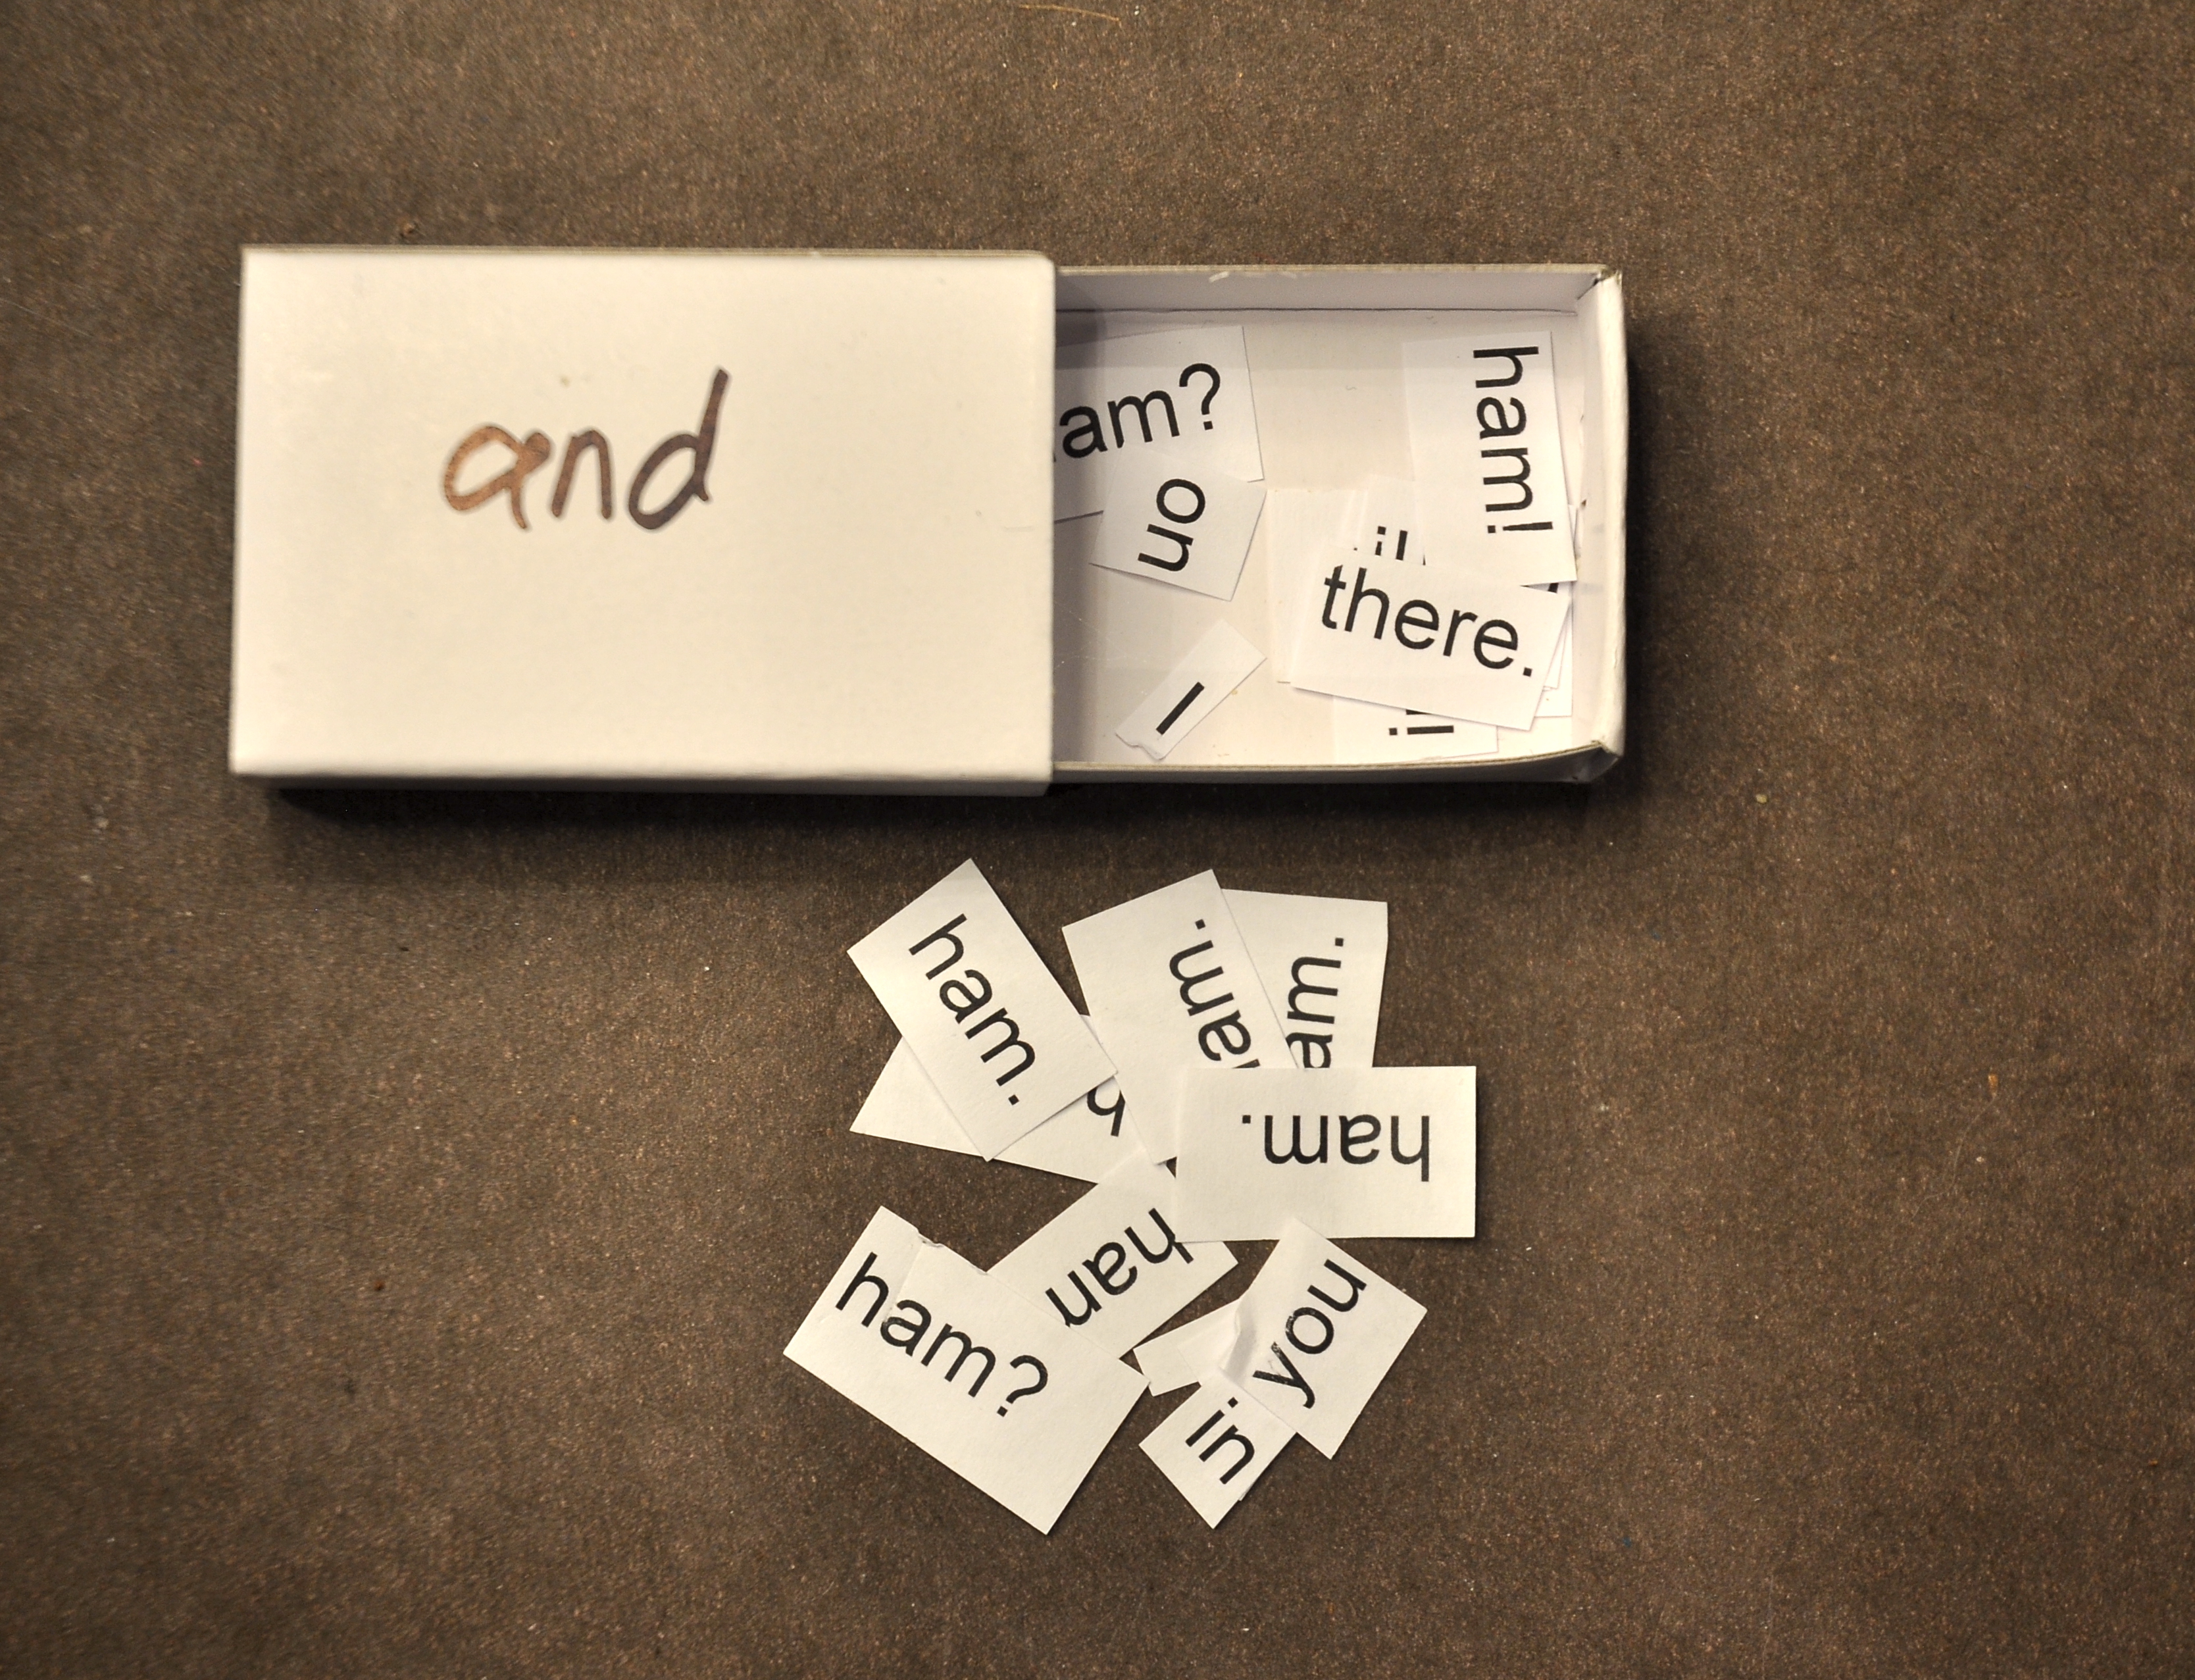 a matchbox with the word 'and' written on top, open to show the word many words on slips of paper